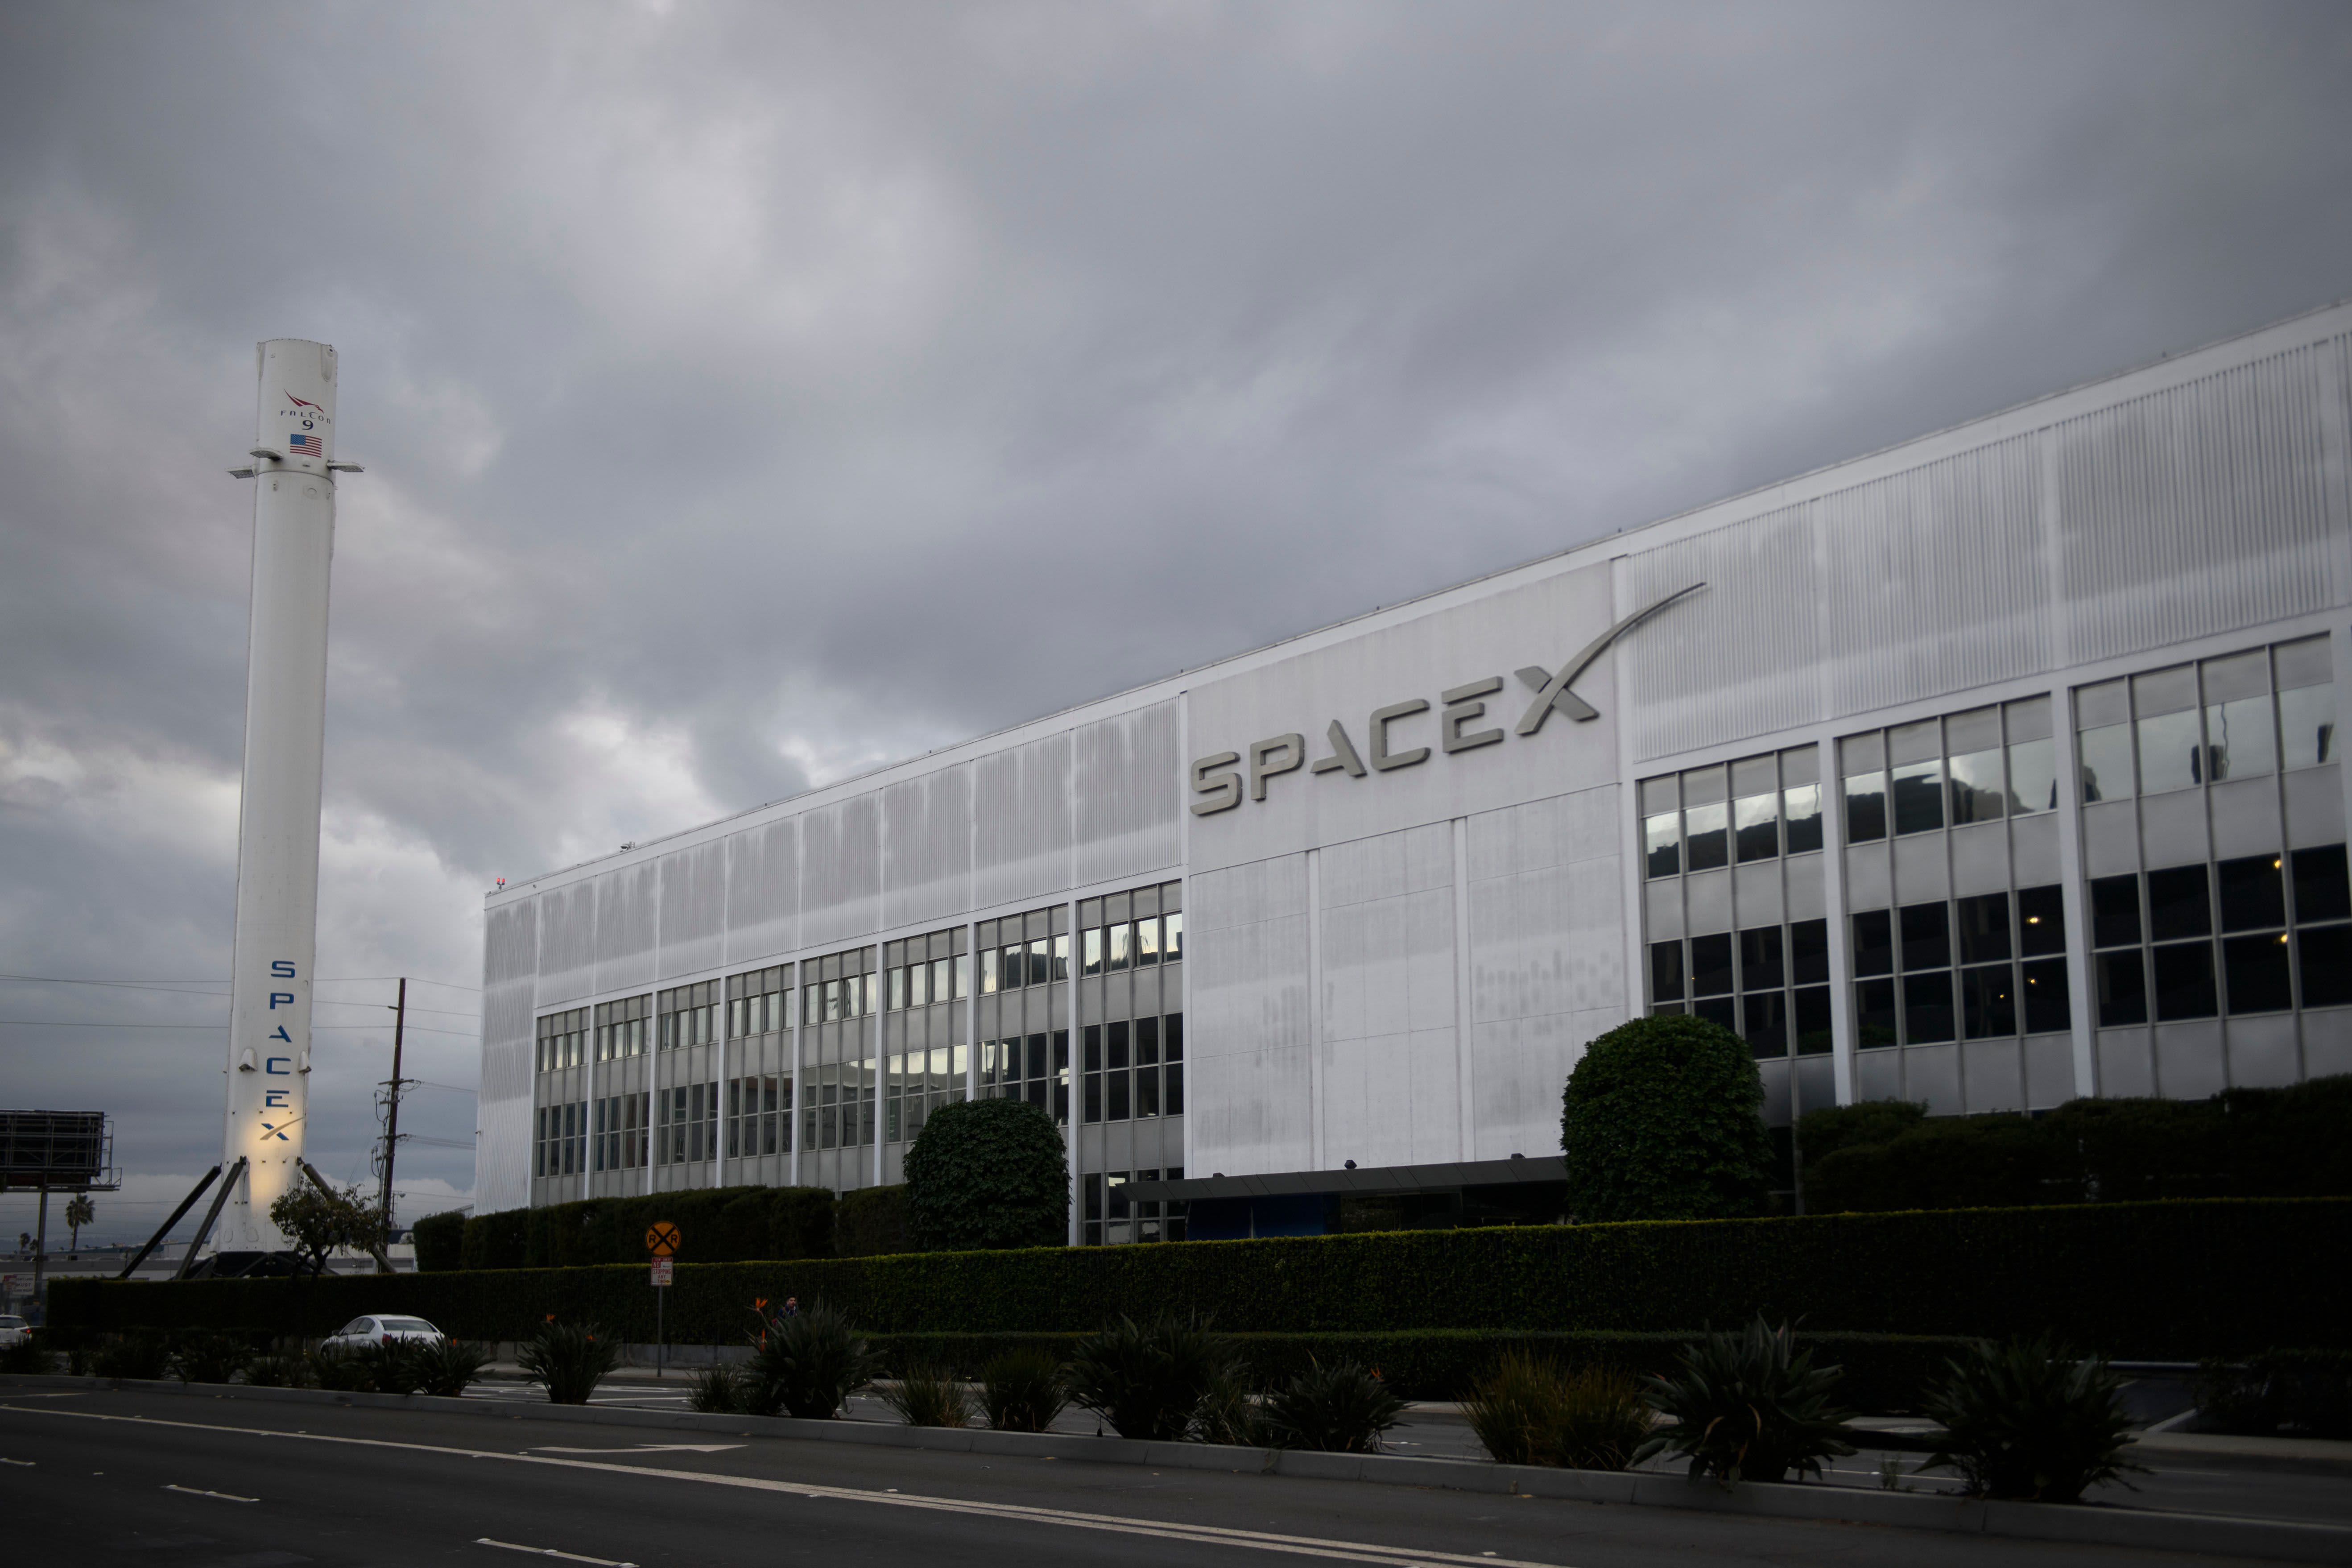 The Department of Justice is suing SpaceX, alleging employment discrimination against refugees and asylum seekers